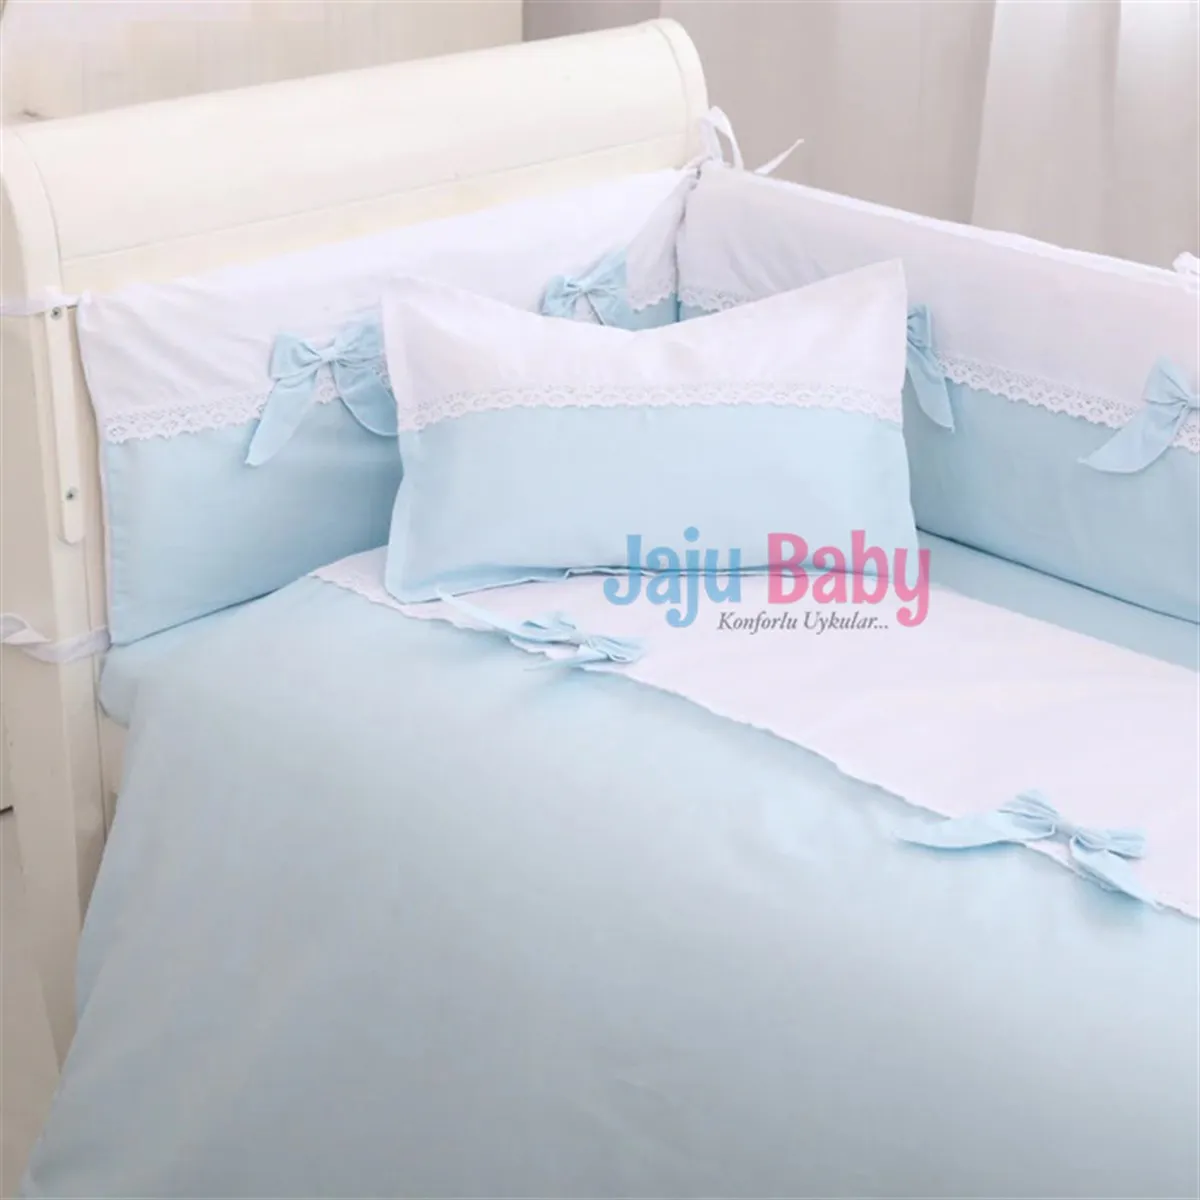 Jaju Baby Handmade, Blue White Baby Bedding Set and Edge Protection, Baby Bed Linen, Baby Bed Sheet, Crib Barrier Set